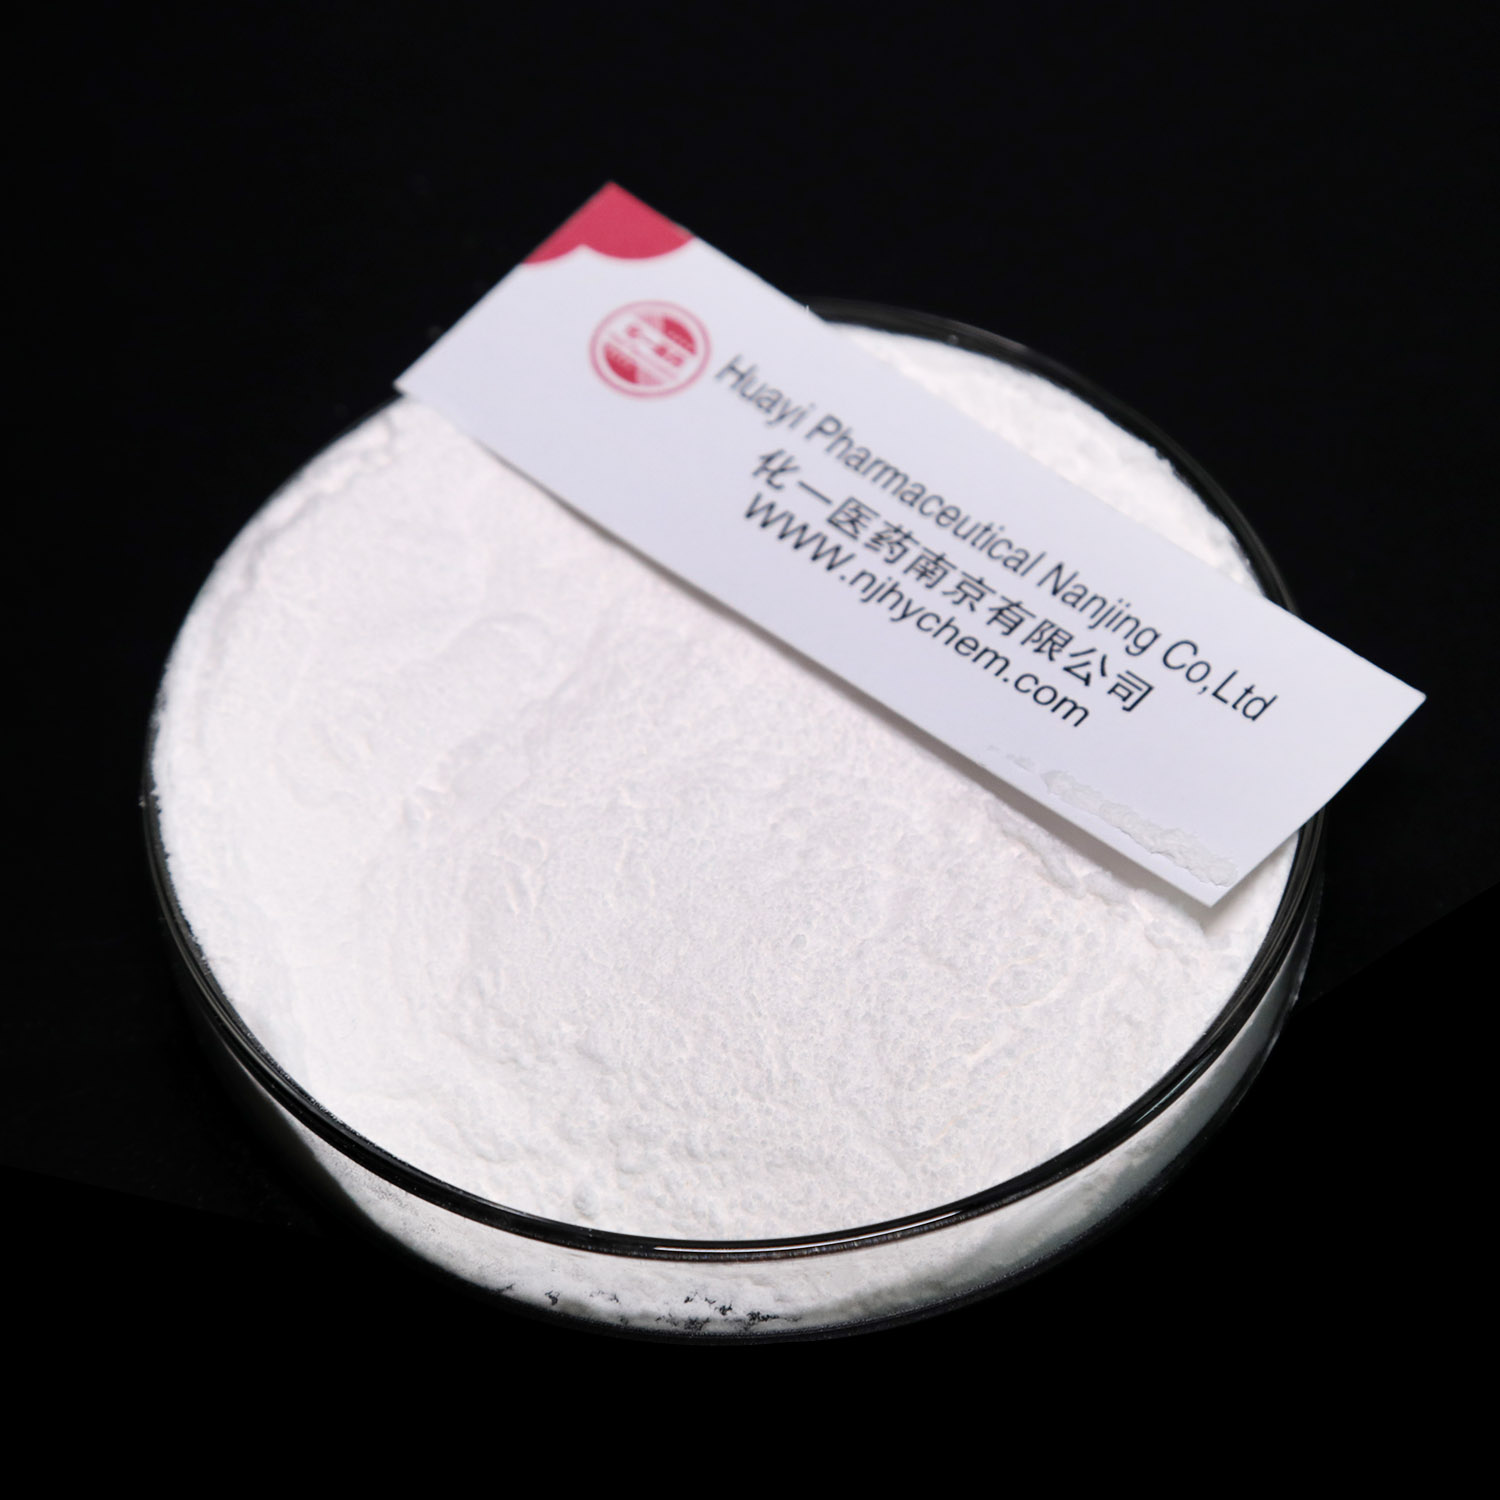 High concentrations hexanophenone 942-92-7 Help with customs clearance High purity Factory 99% Pure 